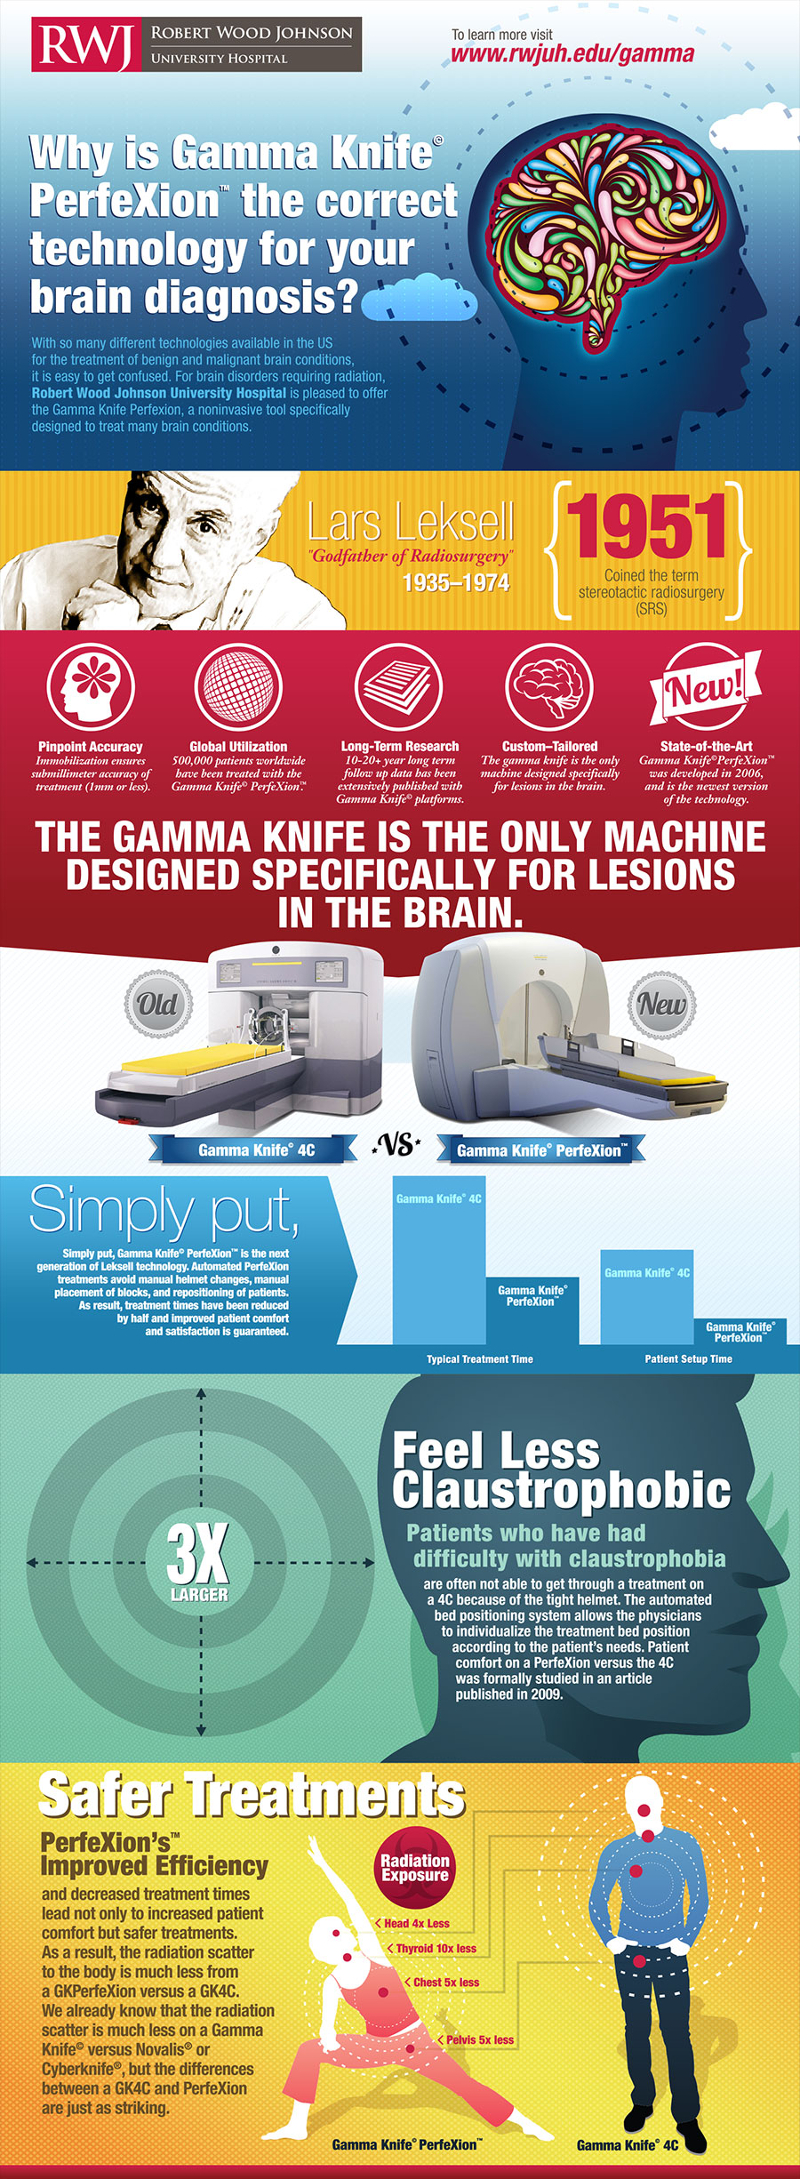 Why Is Gamma Knife Perfexion The Correct Technology For Your Brain Diagnosis